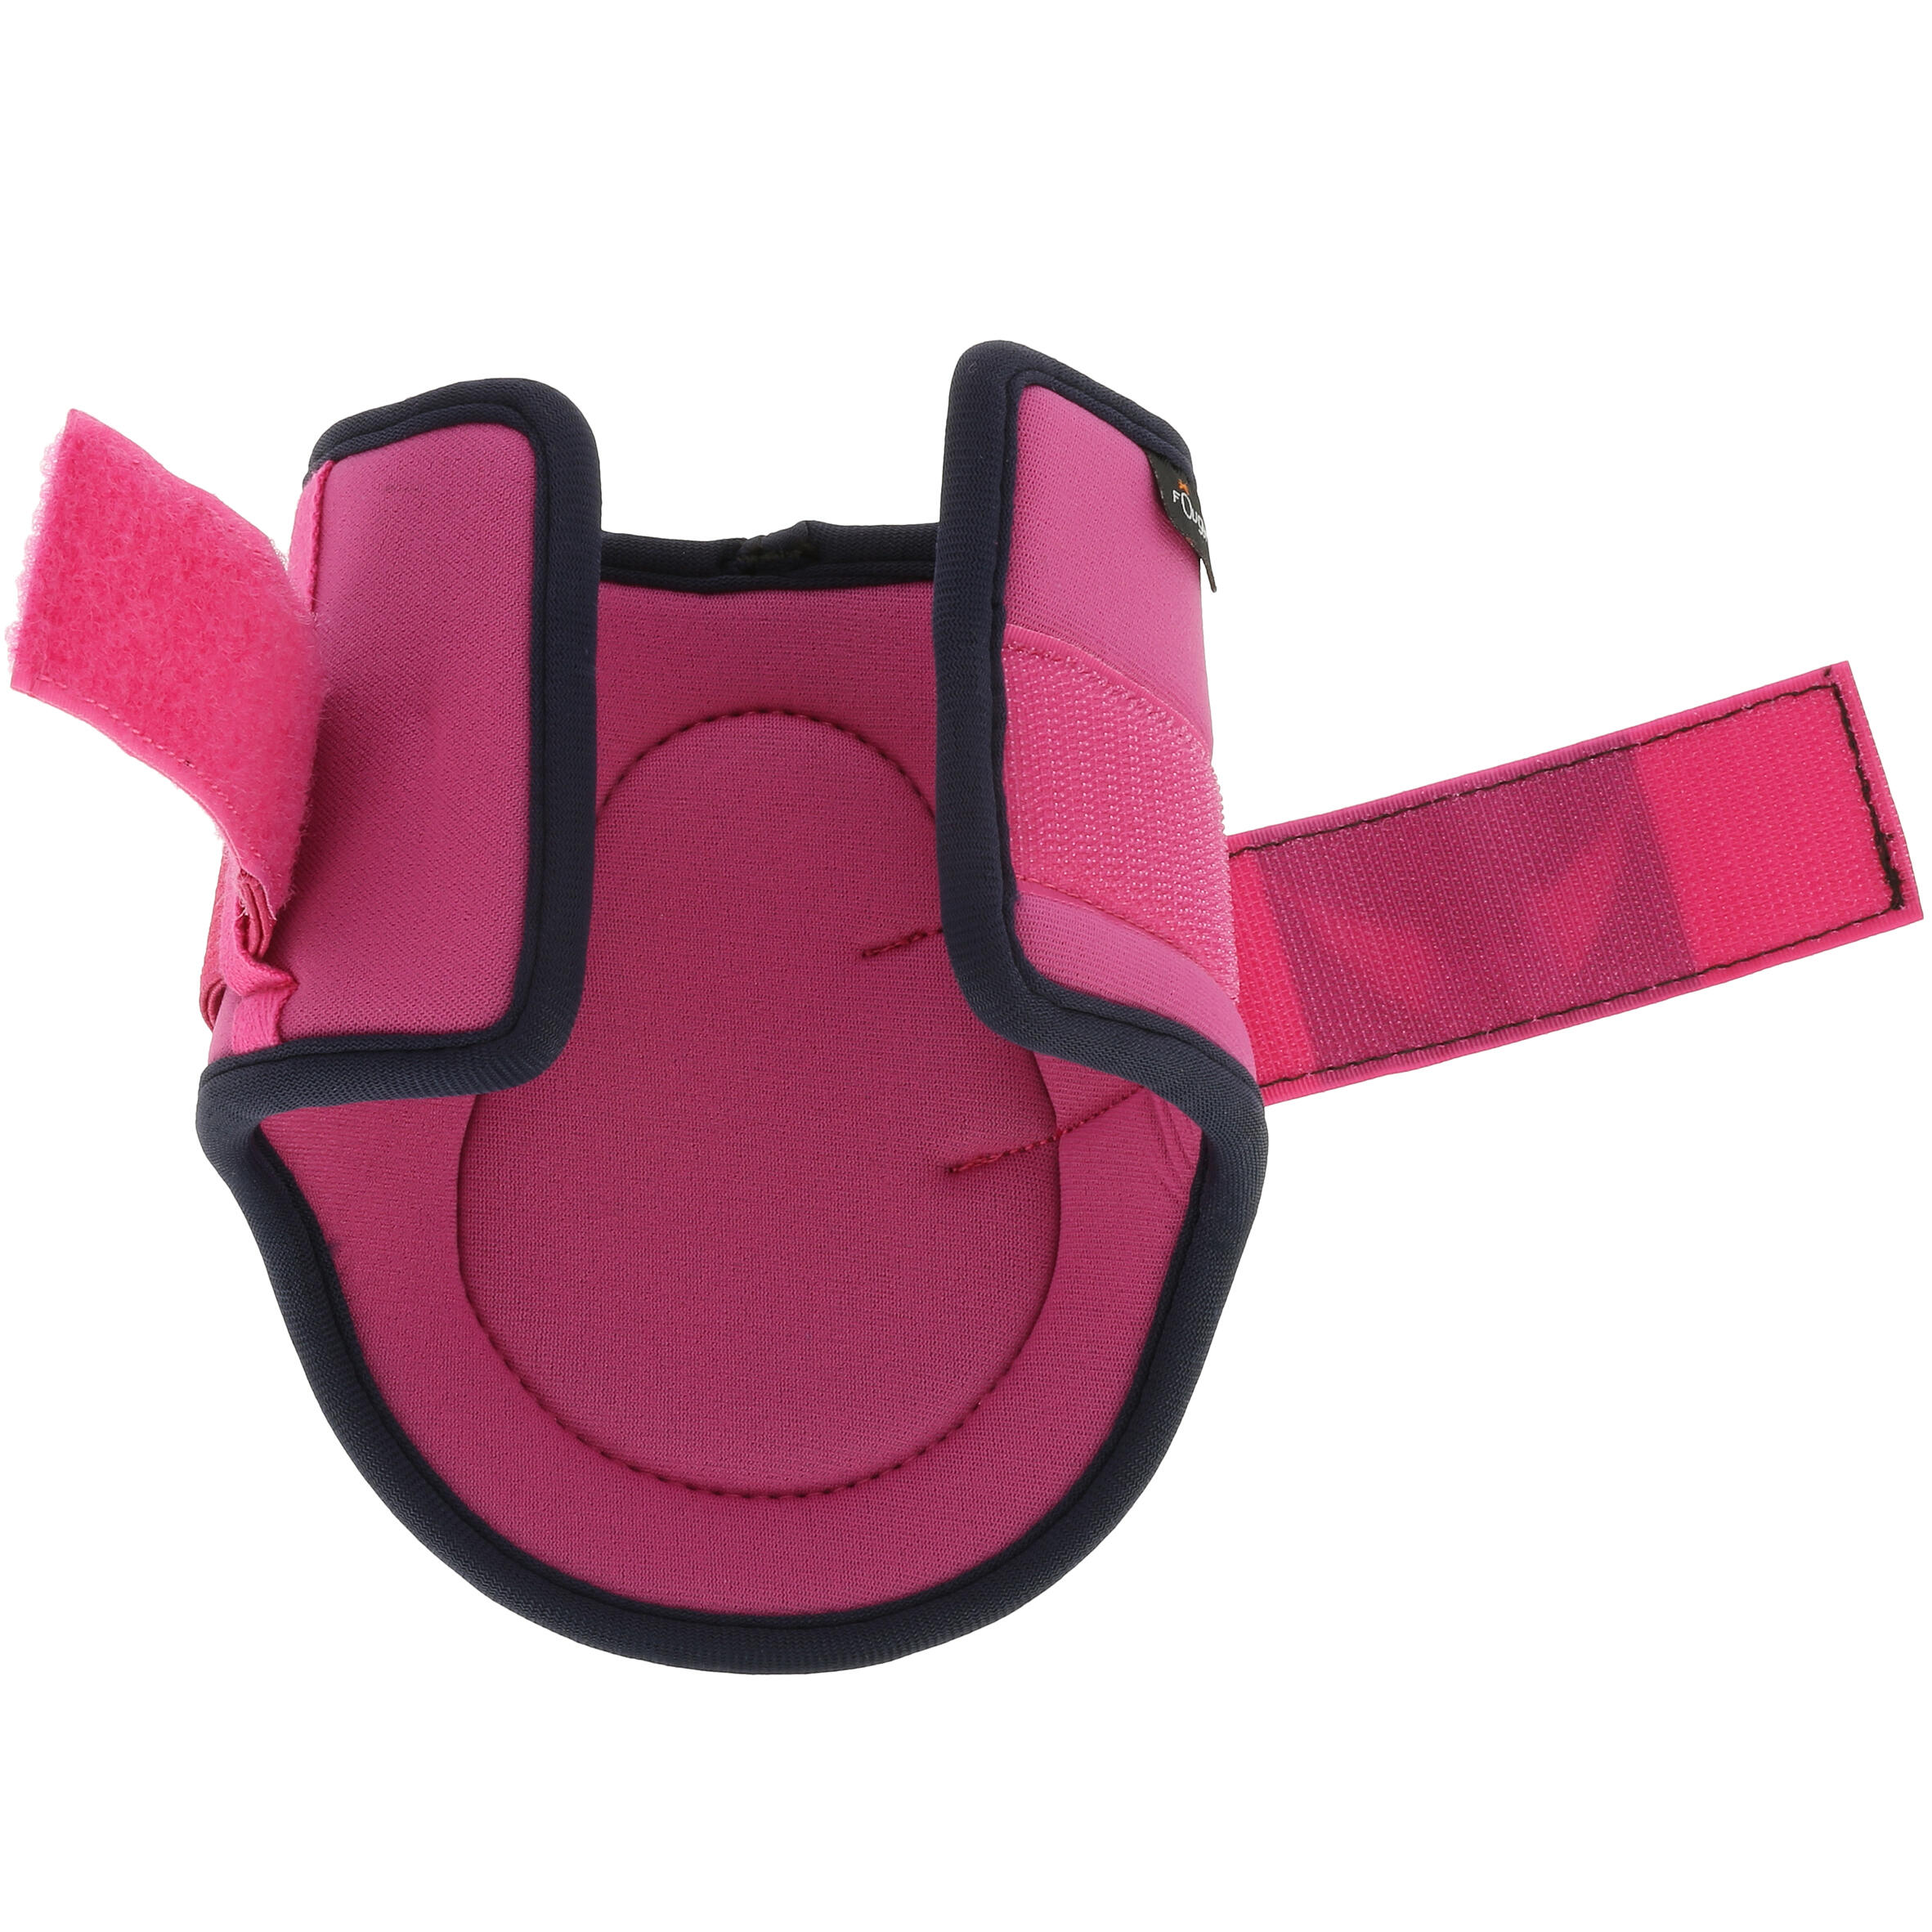 Soft Horse and Pony Set of 2 Tendon Boots + 2 Fetlock Boots - Pink / Navy 5/8